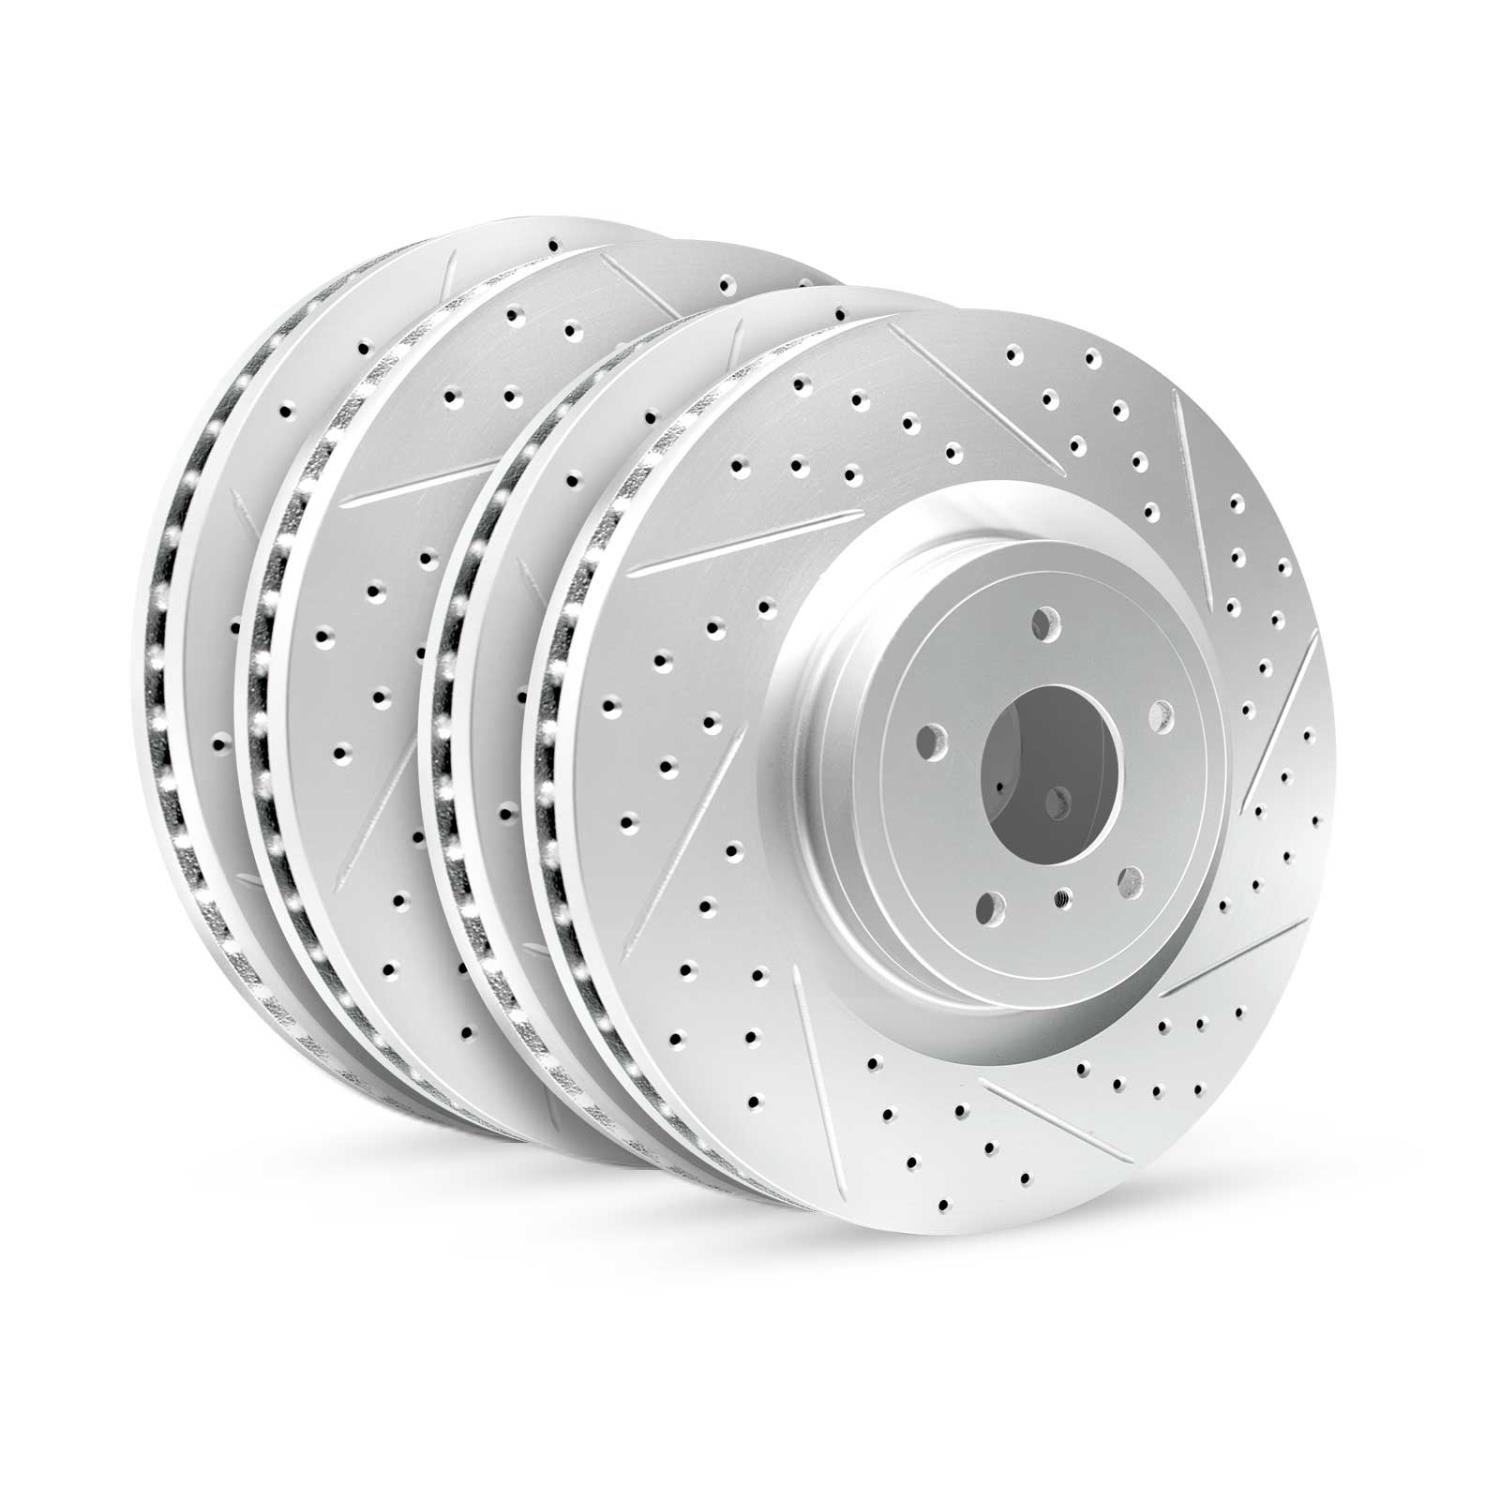 GEO-Carbon Drilled/Slotted Rotors, 2010-2014 Subaru, Position: